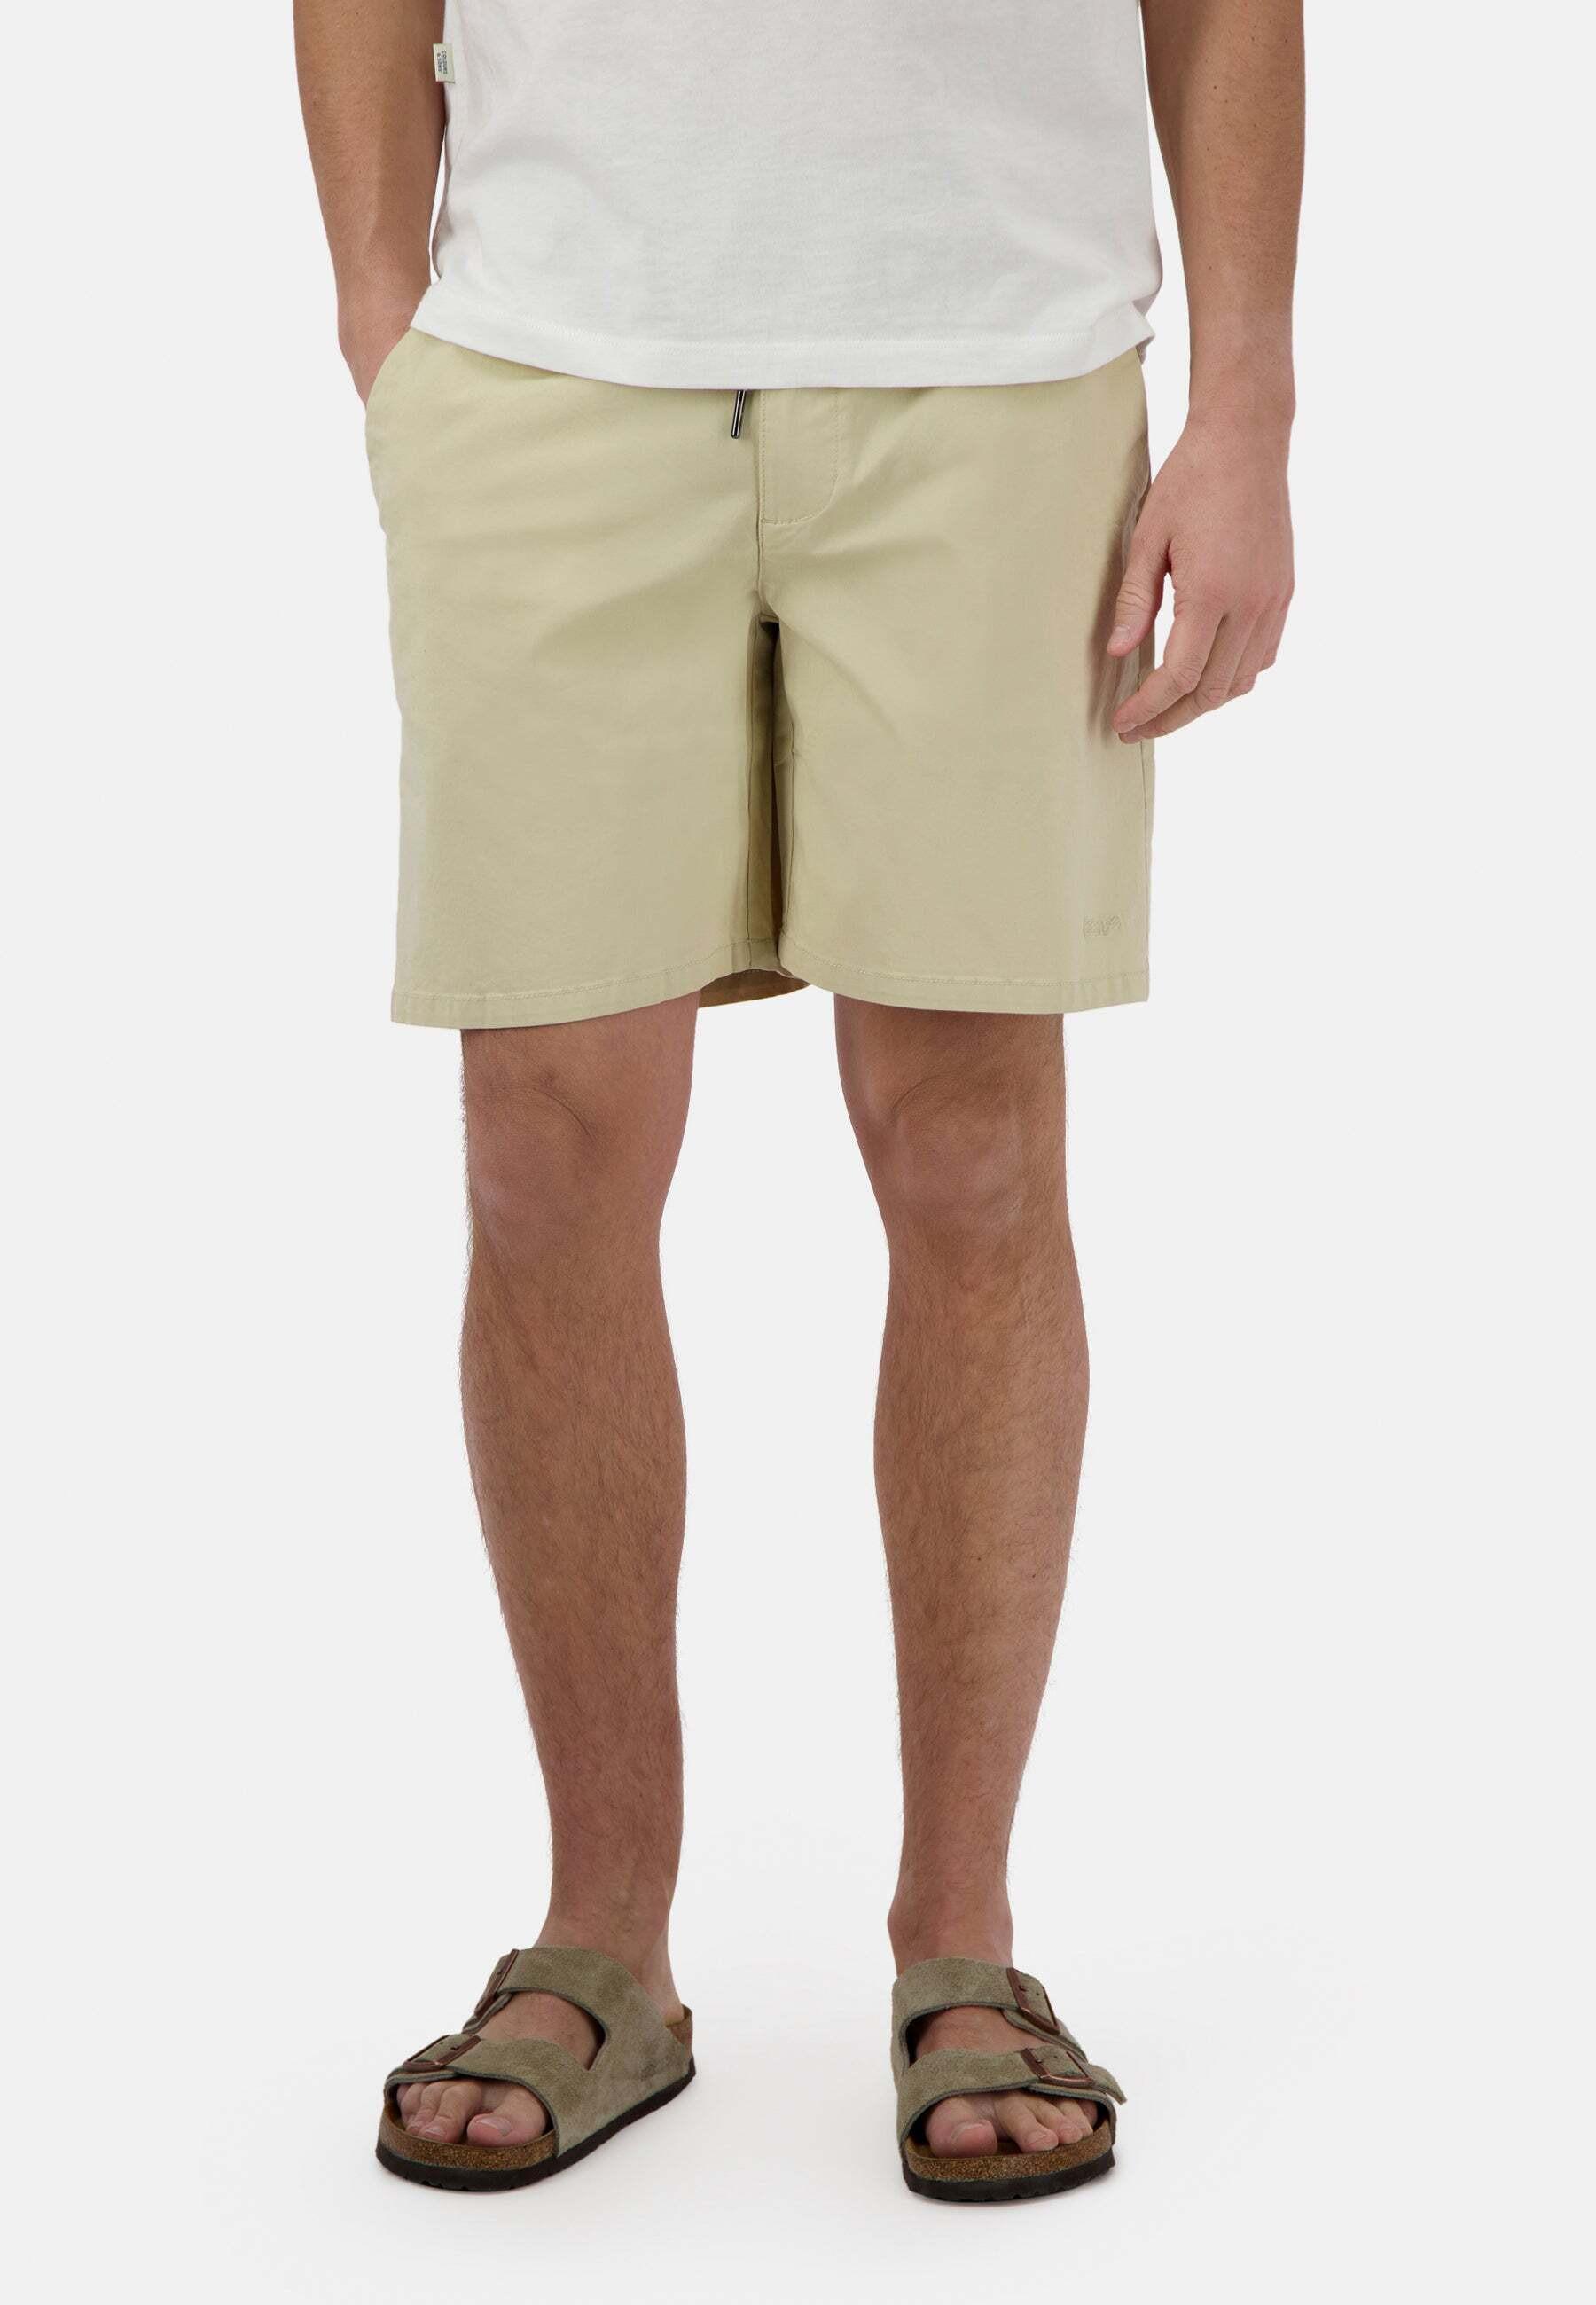 Colours & Sons  Shorts Twill 